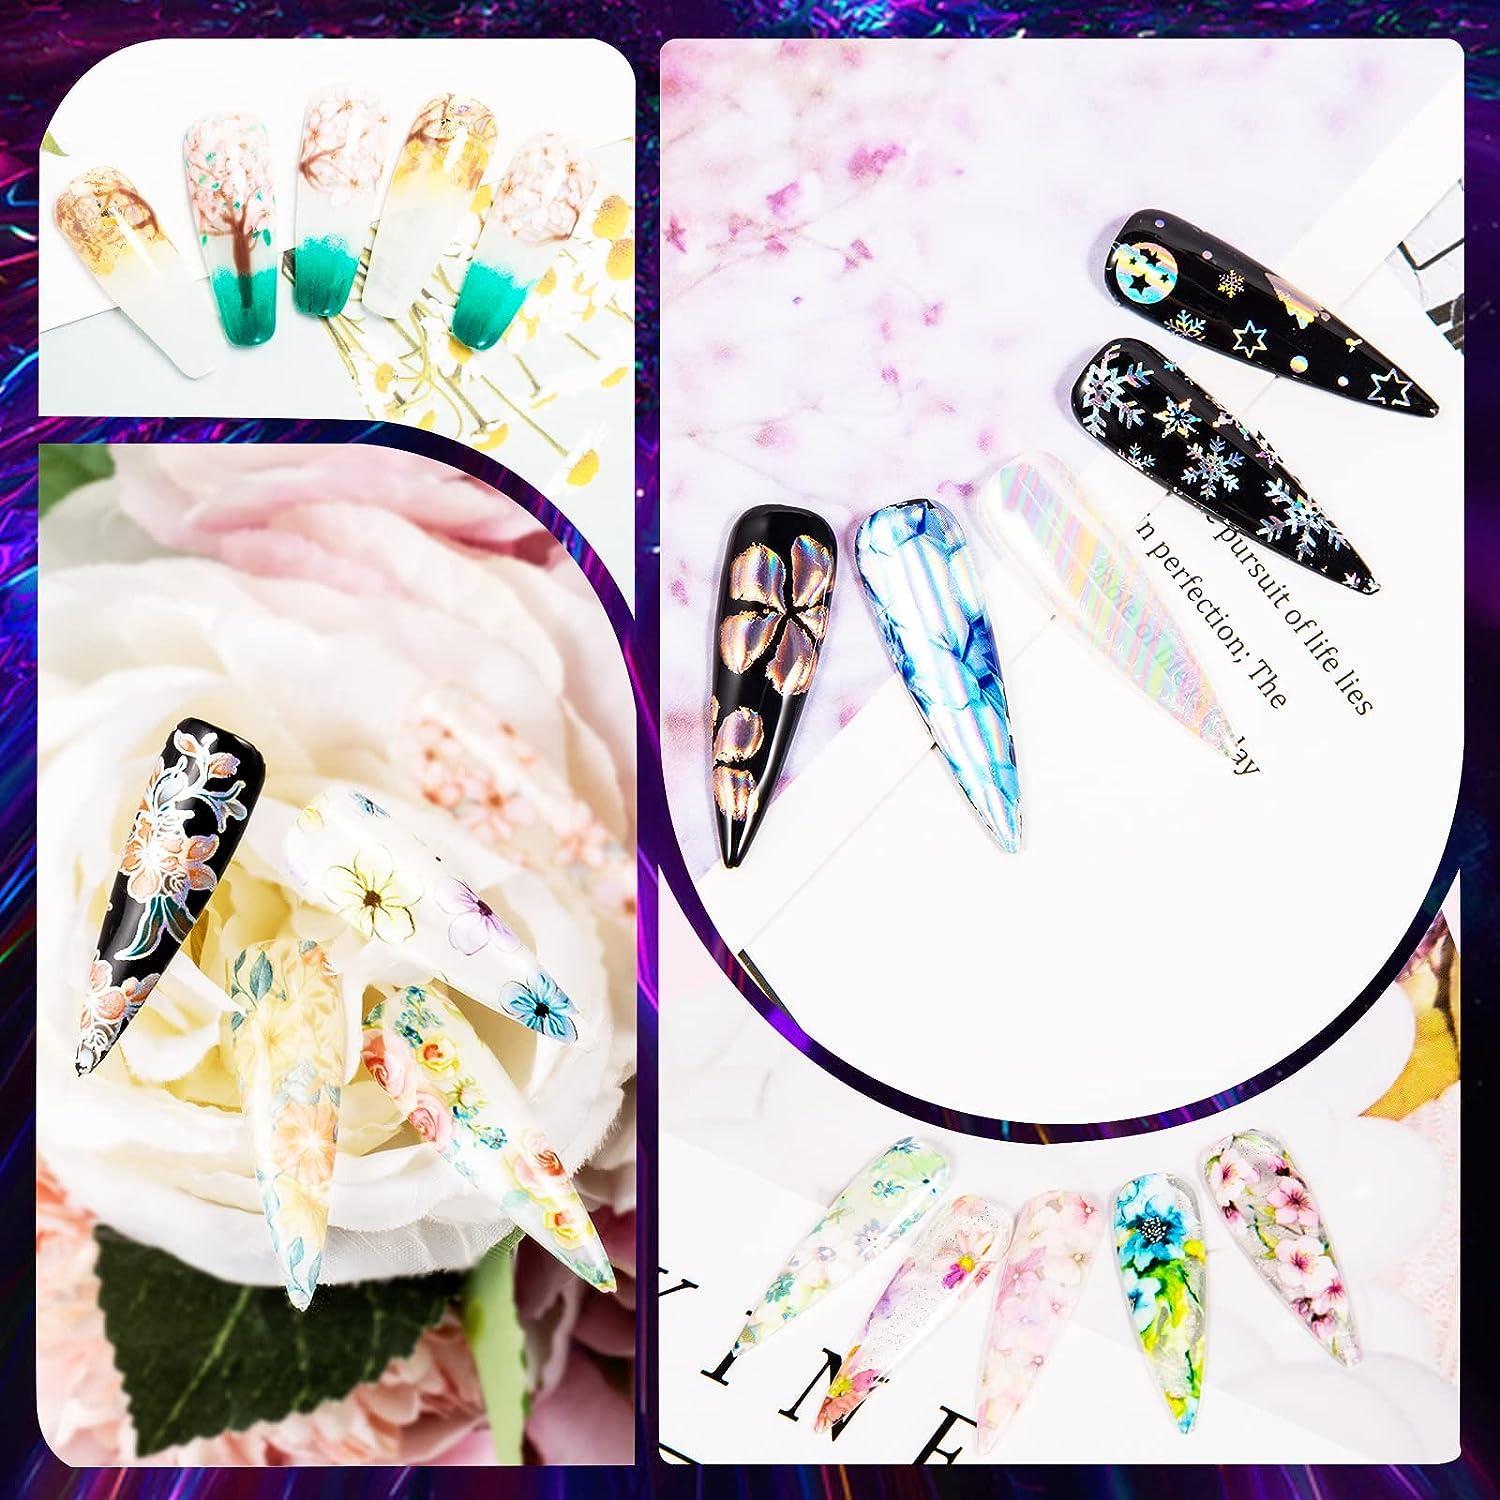 16pcs Transfer Foil For Nails Set Decal Summer Waterdrop Bubbles Slider  Flower Cool Adhesive Glue DIY Nail Art Decor Kit LA794-1 - Price history &  Review